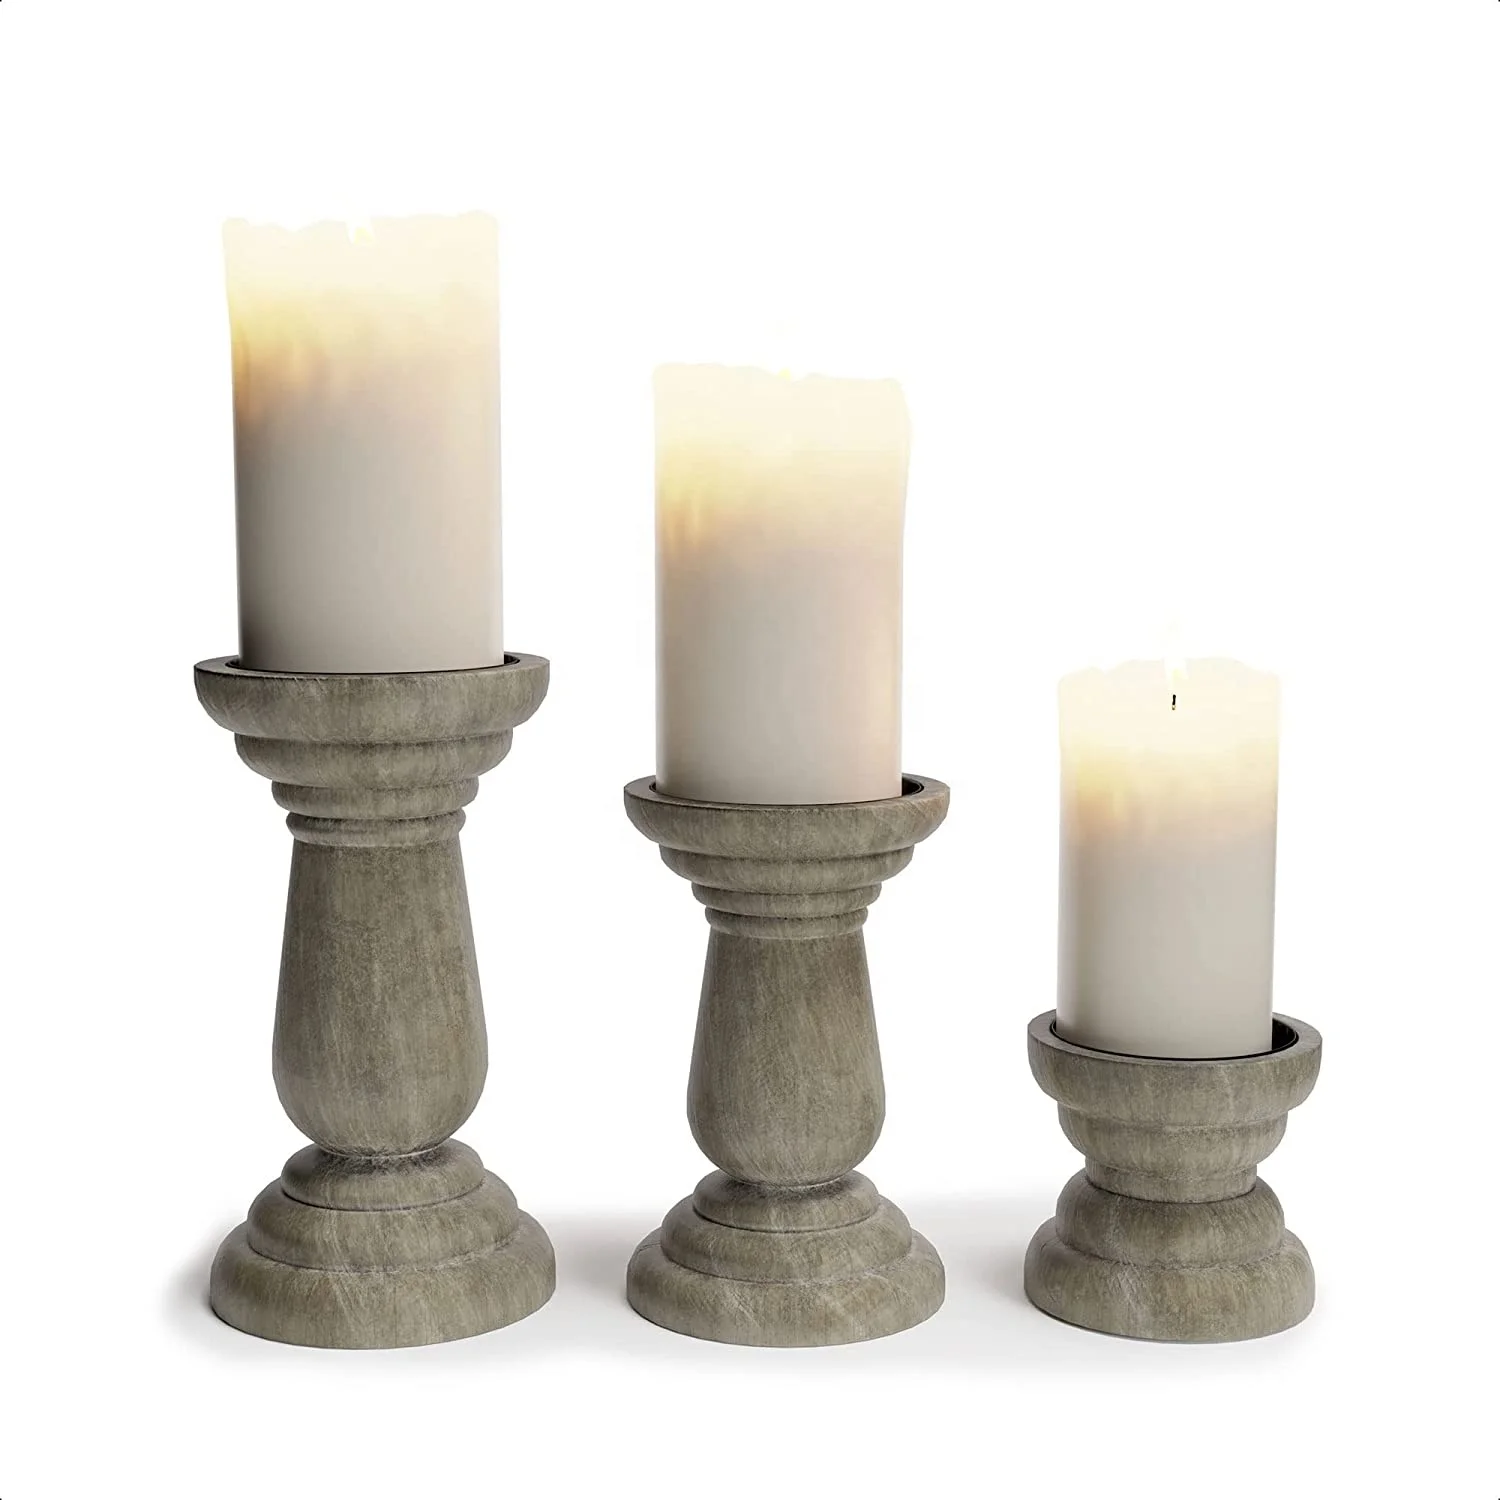 Tall Ornate pillar CANDLE HOLDER floor standing rustic GREY Grand Candlestick 